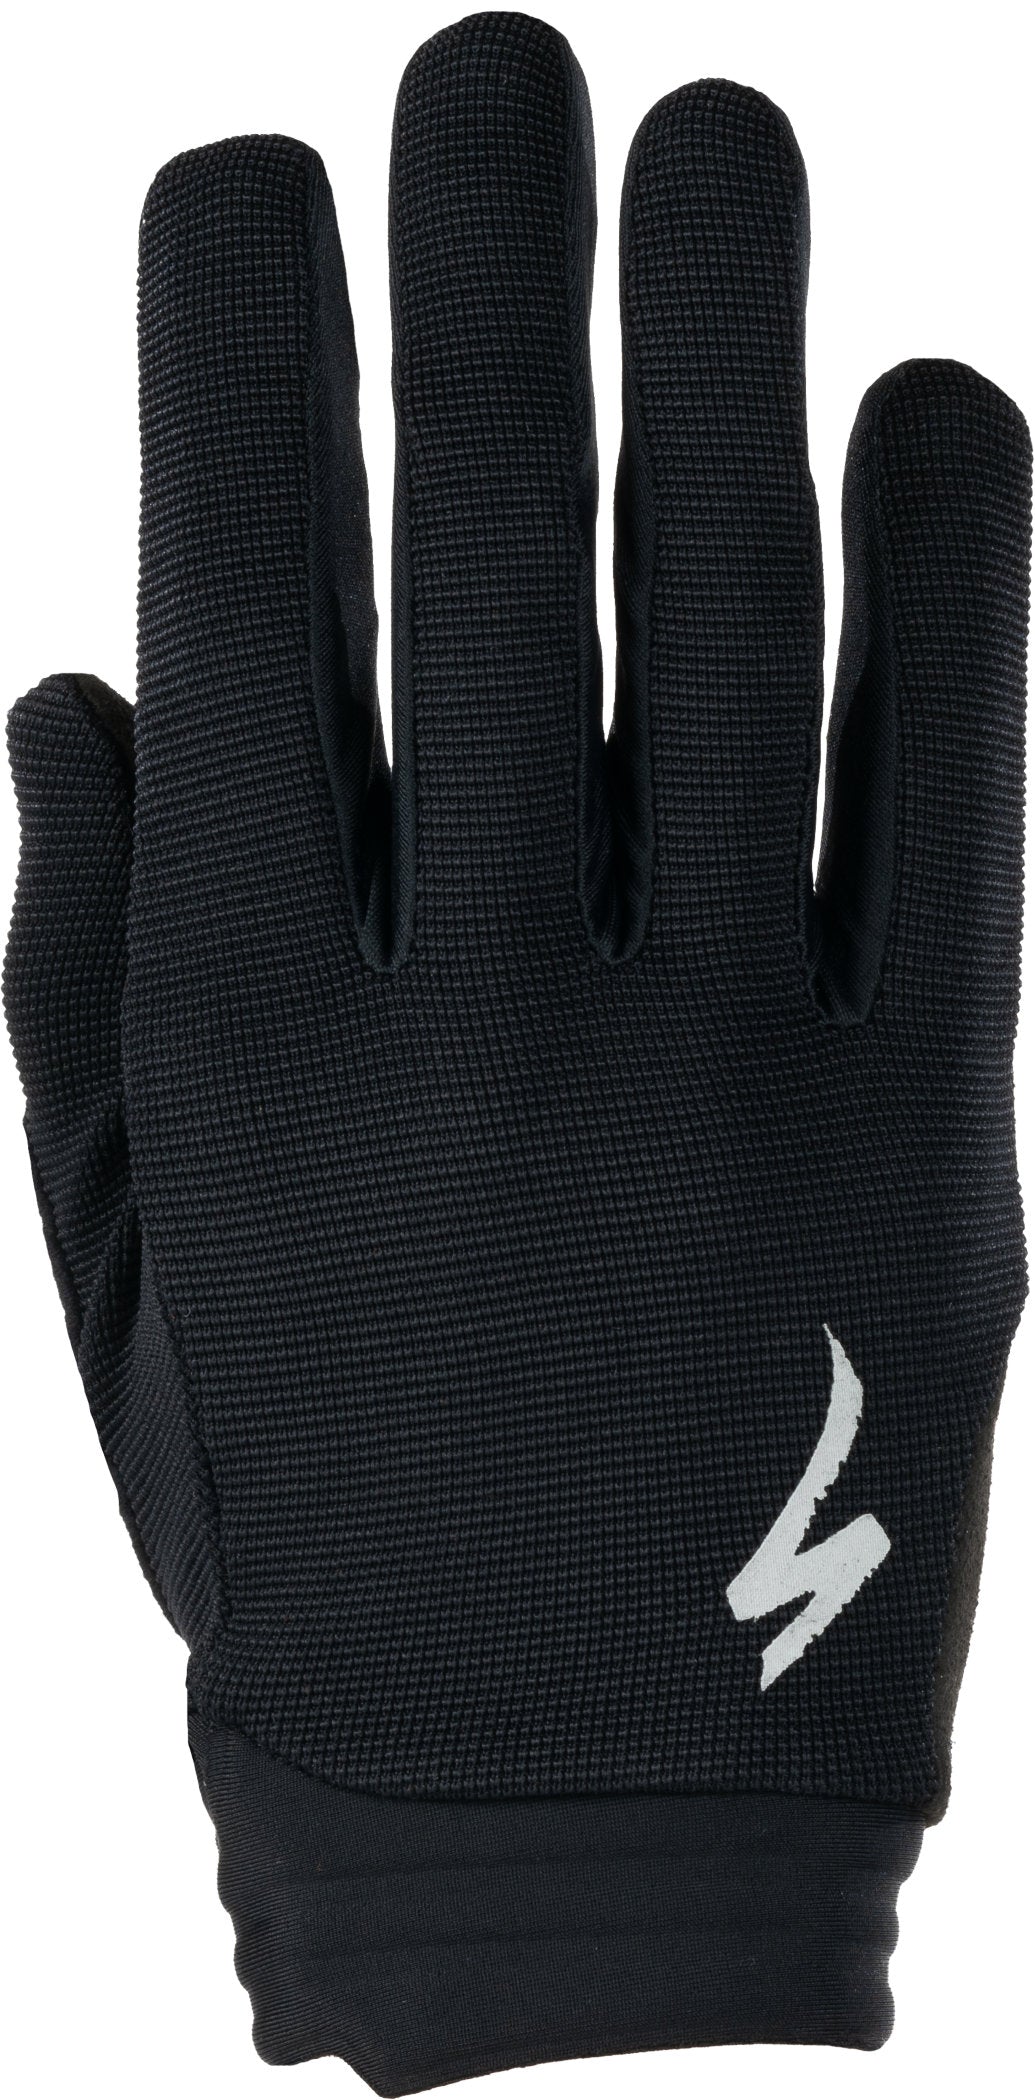 Specialized Men's Trail Bicycle Gloves